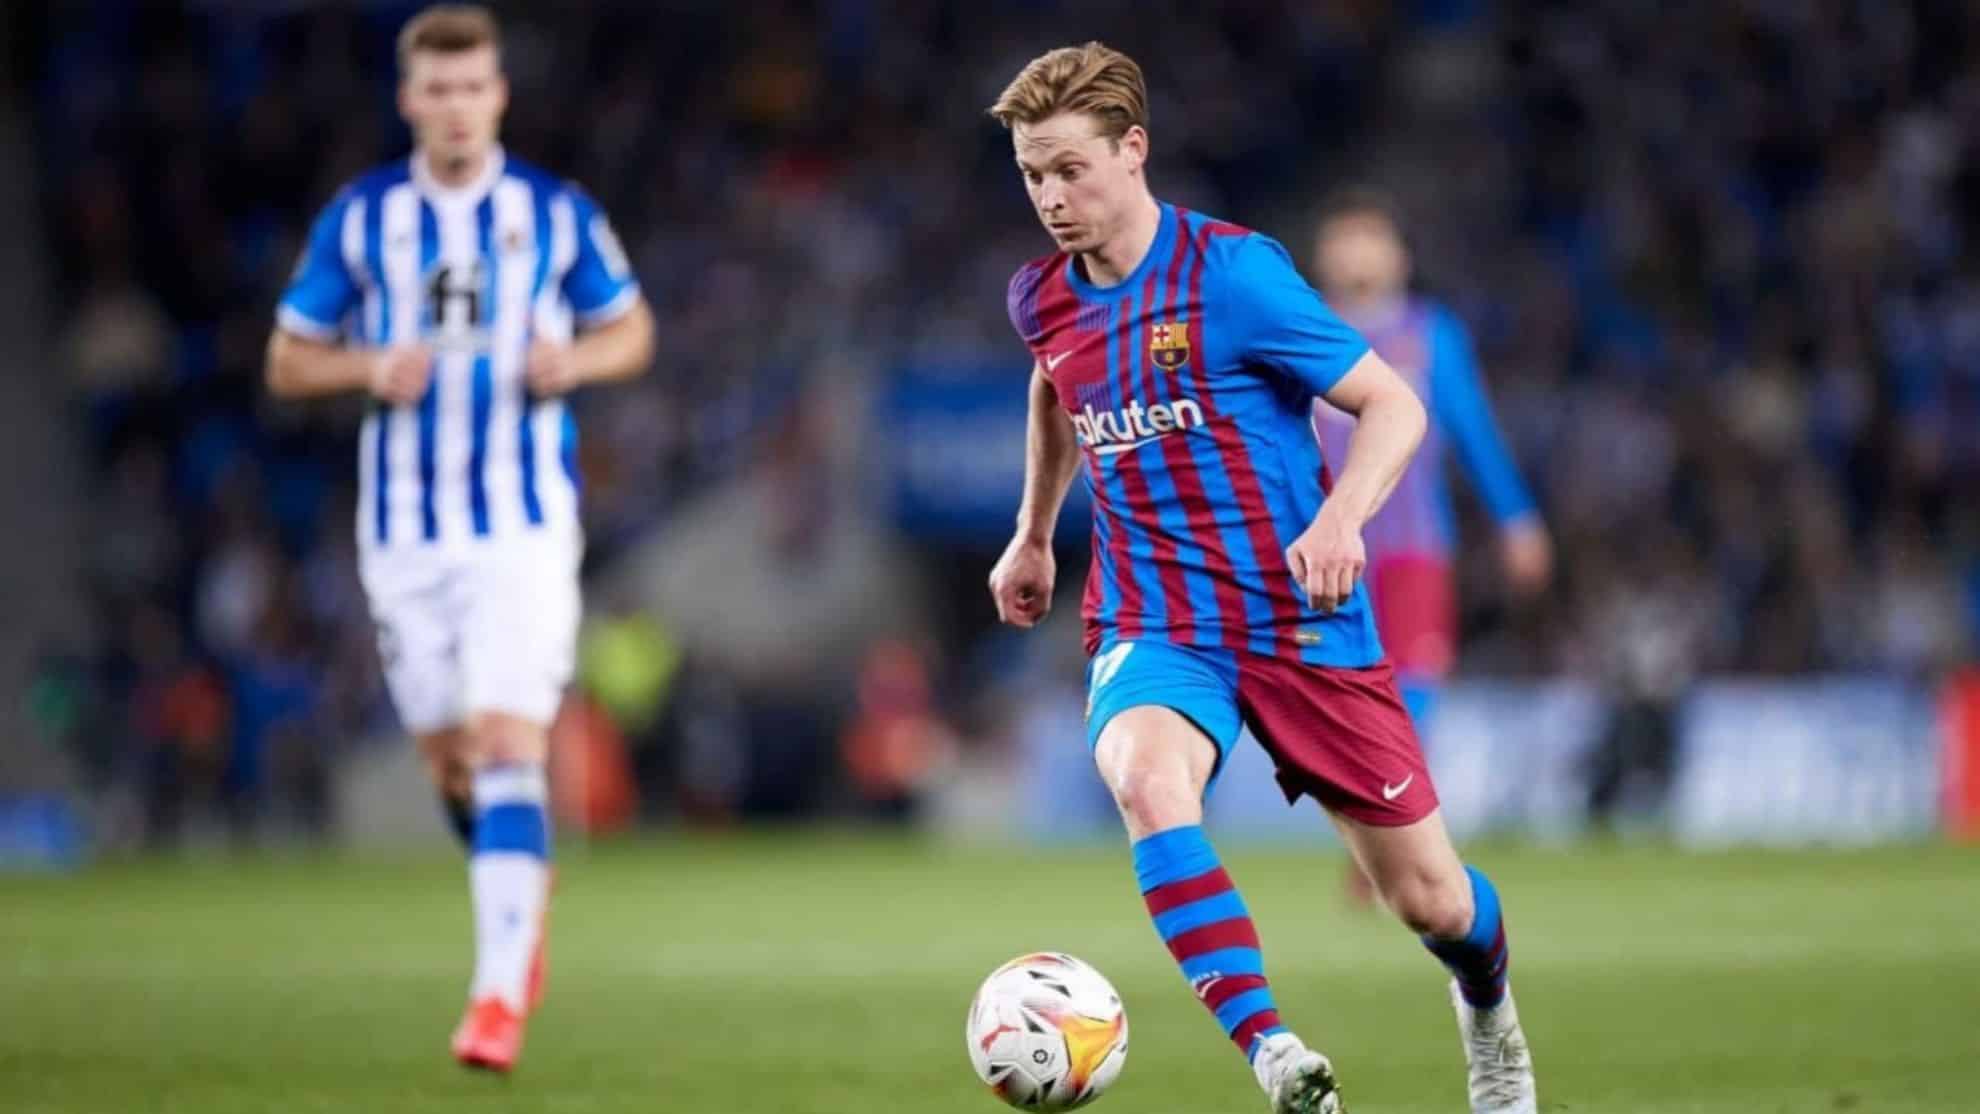 Man United to announce double deal for Dutch Frenkie de Jong and Tyrell Malacia.